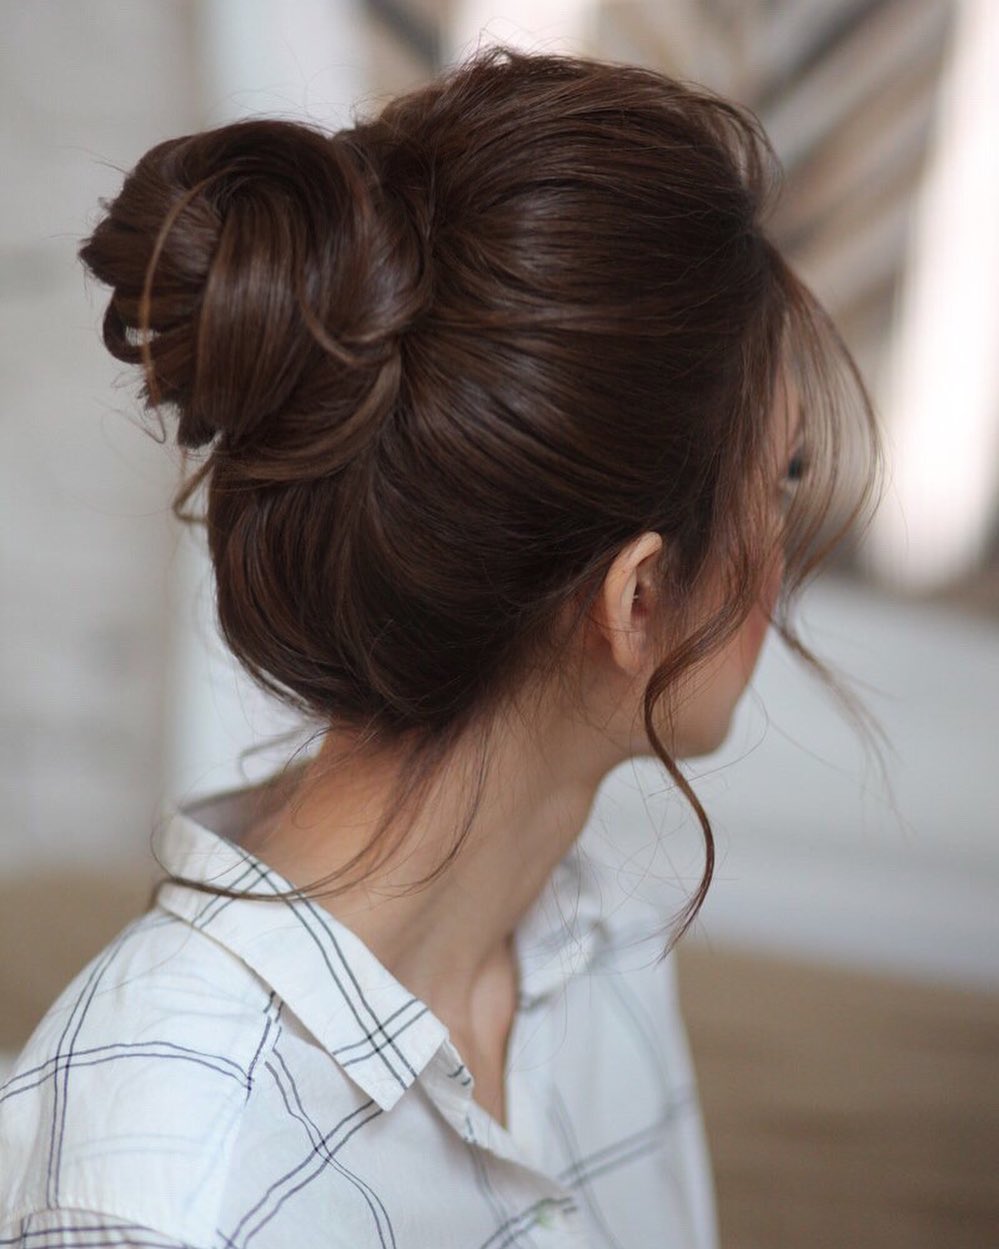 A bun in a hurry - the most trendy hairstyle of summer 2023